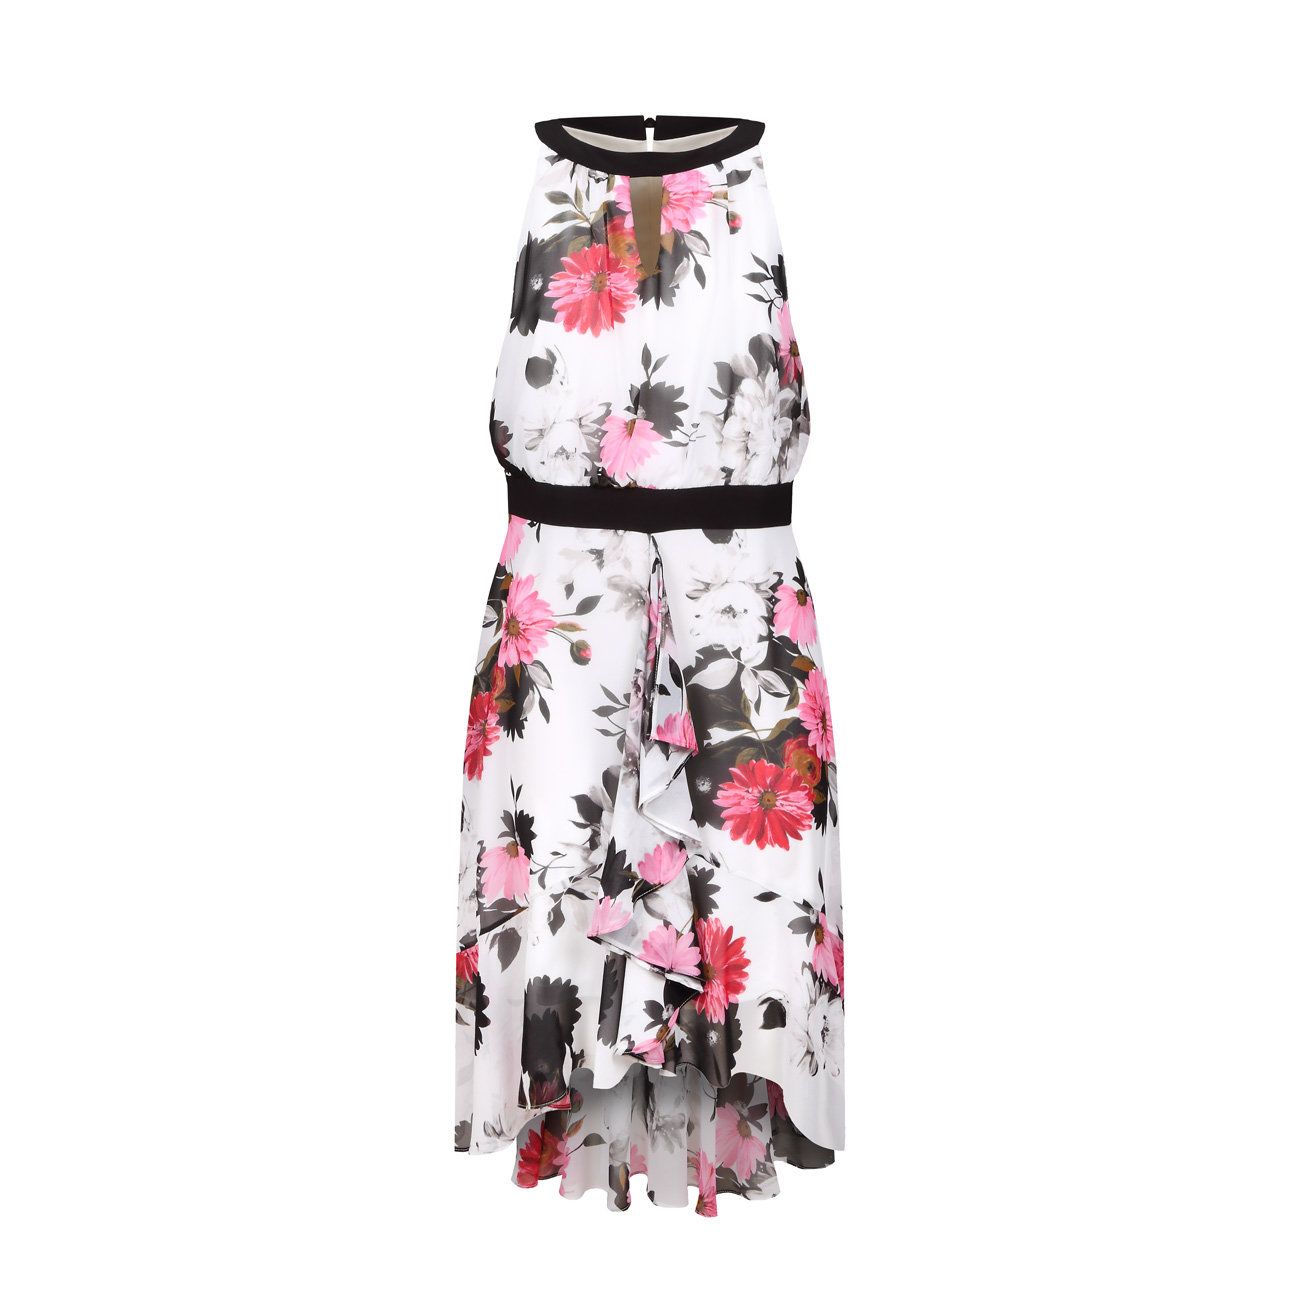 SLEEVELESS DRESS WITH VOULANT AND FLOWER PRINT Woman White Black Pink  2119265830081